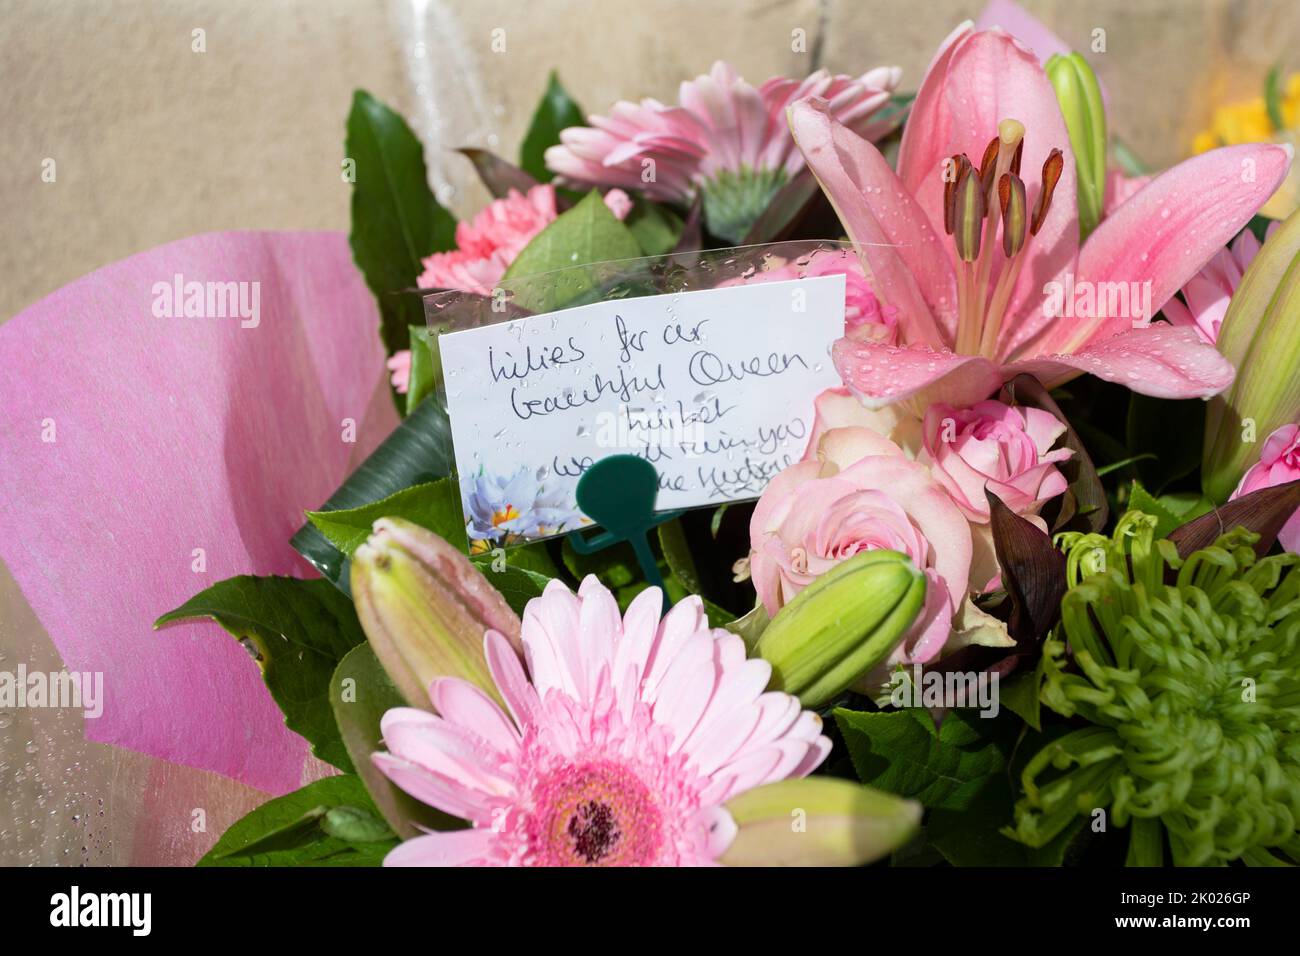 Cardiff, Wales, UK. 9 Sep, 2022. The message in a bunch of flowers for Queen Elizabeth II outside Cardiff City Hall reads ‘Lilies for our beautiful Queen Lilibet'. Credit: Mark Hawkins/Alamy Live News Stock Photo